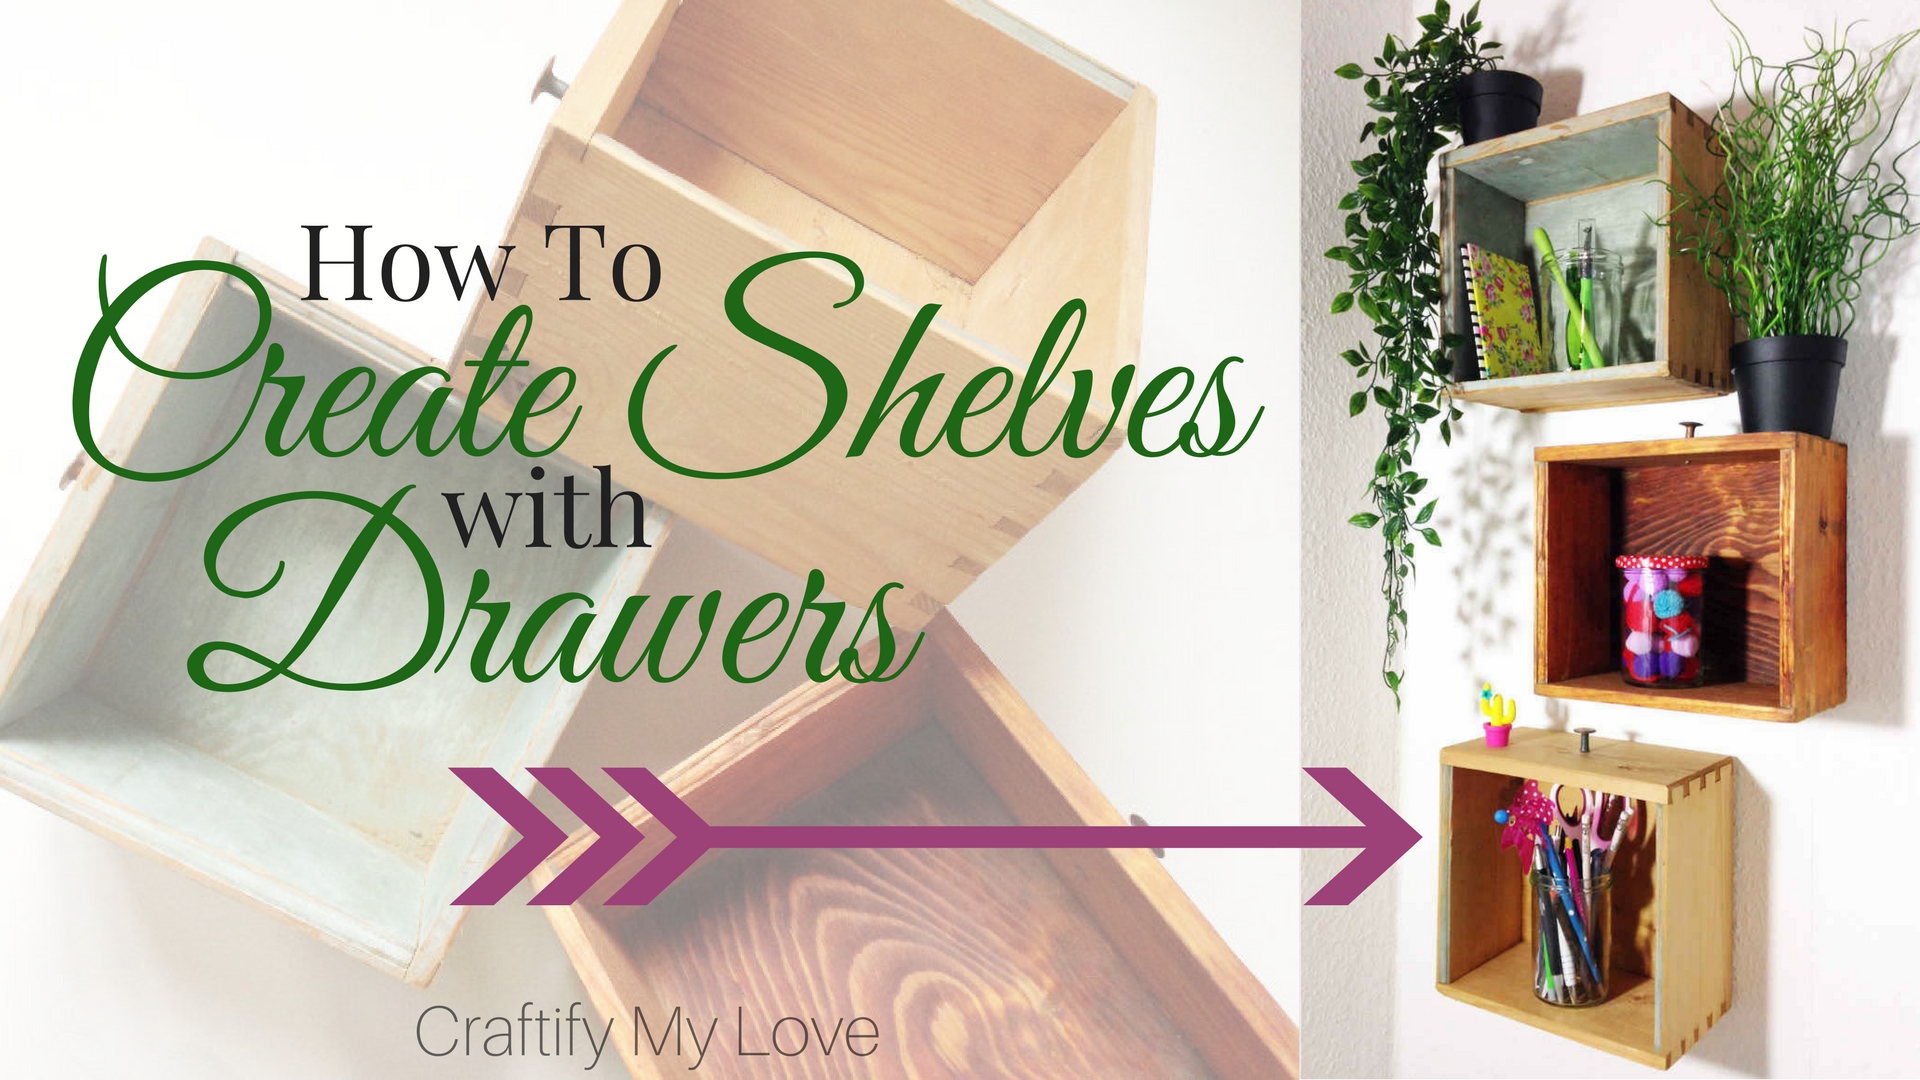 How To Make Shelves From Old Drawers, Turn Old Drawers Into Shelves